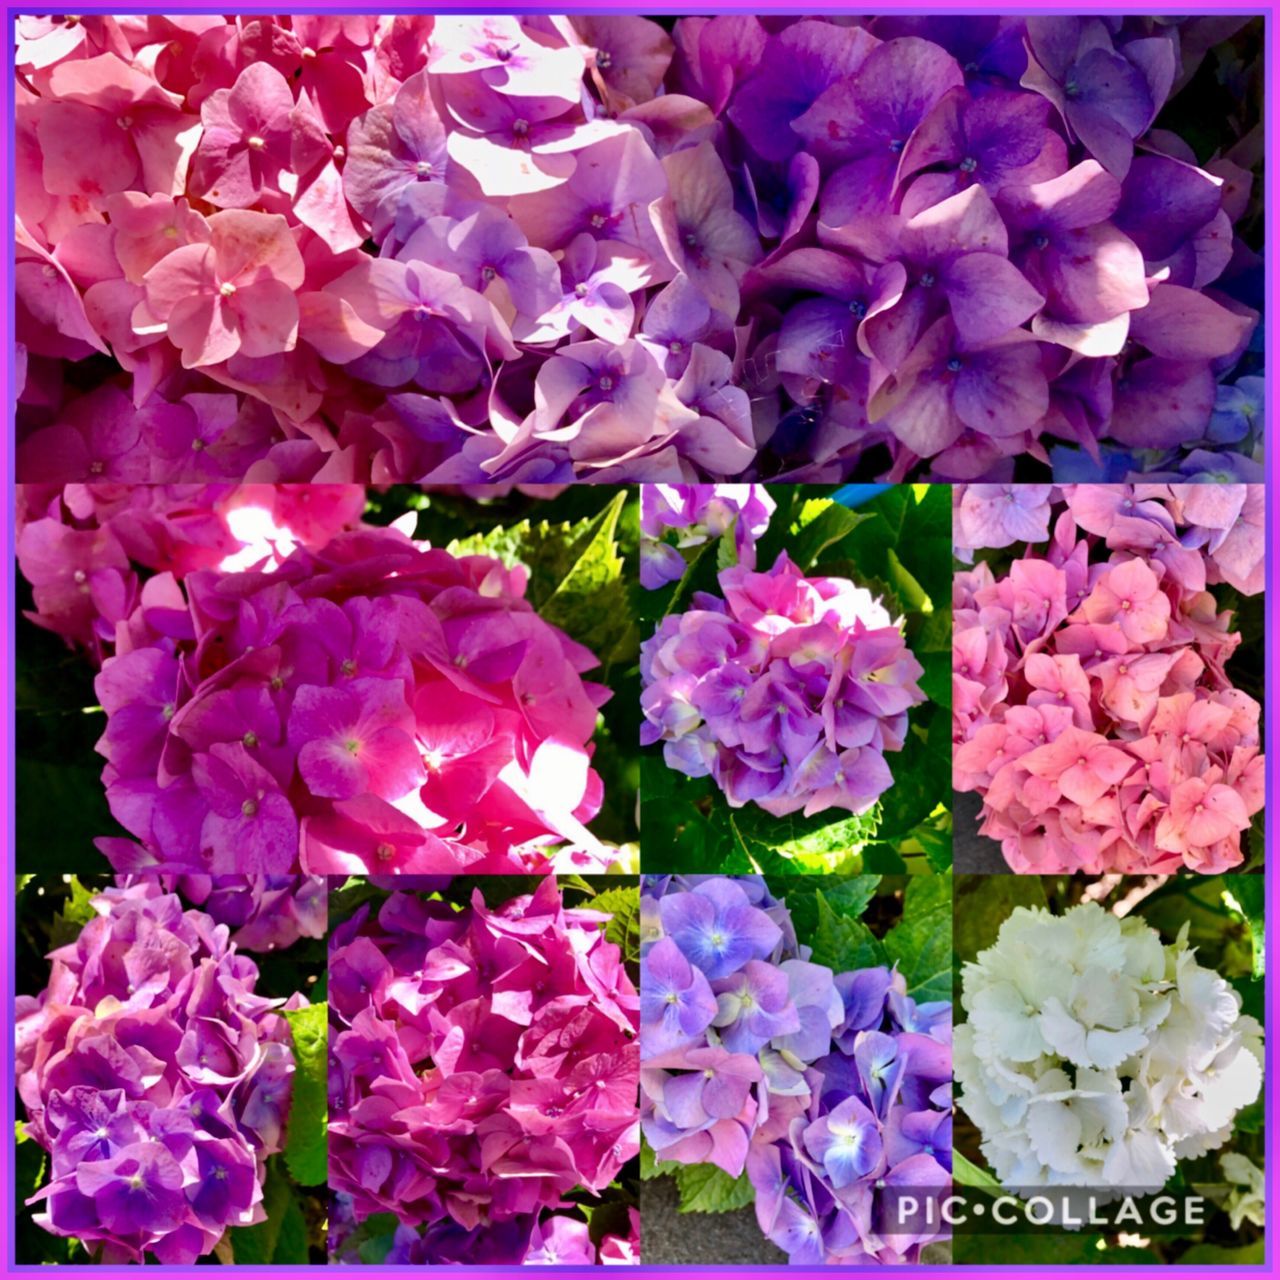 flower, freshness, nature, fragility, beauty in nature, petal, pink color, growth, purple, flower head, plant, full frame, no people, blooming, backgrounds, water, leaf, close-up, outdoors, day, bougainvillea, lilac